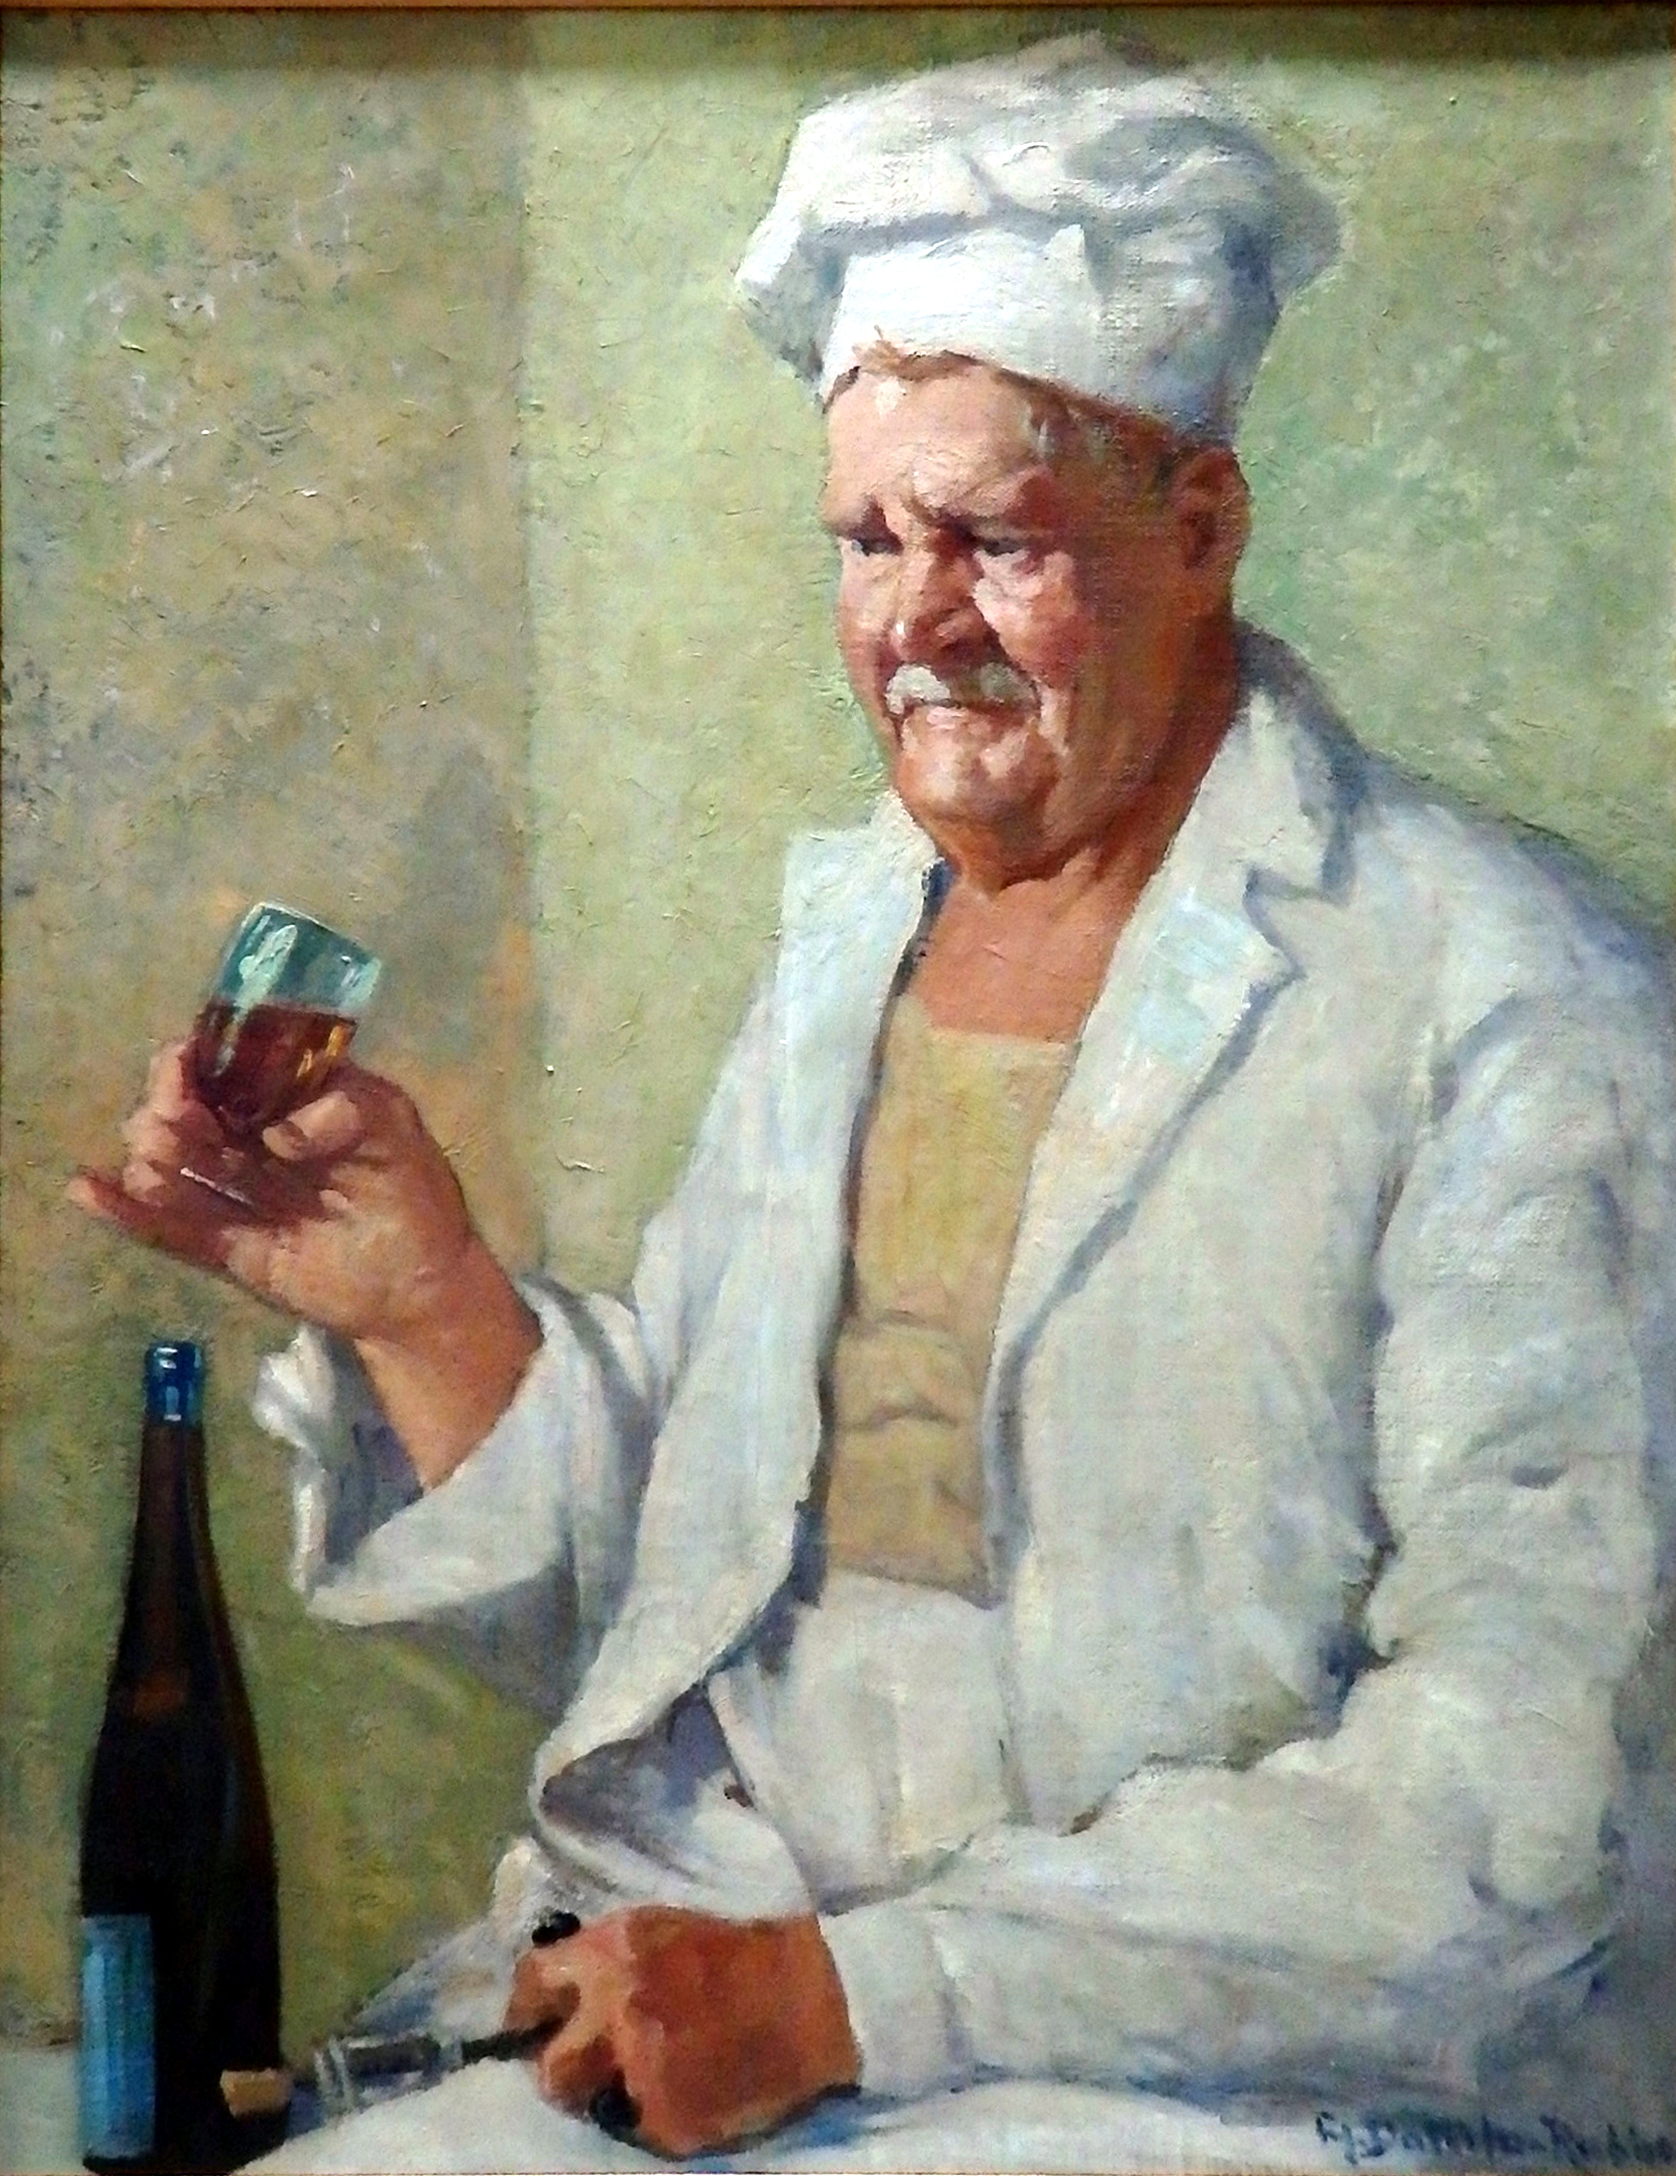 Anthony_Dattilo-Rubbo_Good_Wine_Needs_no_Bush_sic_71_x_56cm_Gift_of_the_artist_1940.png